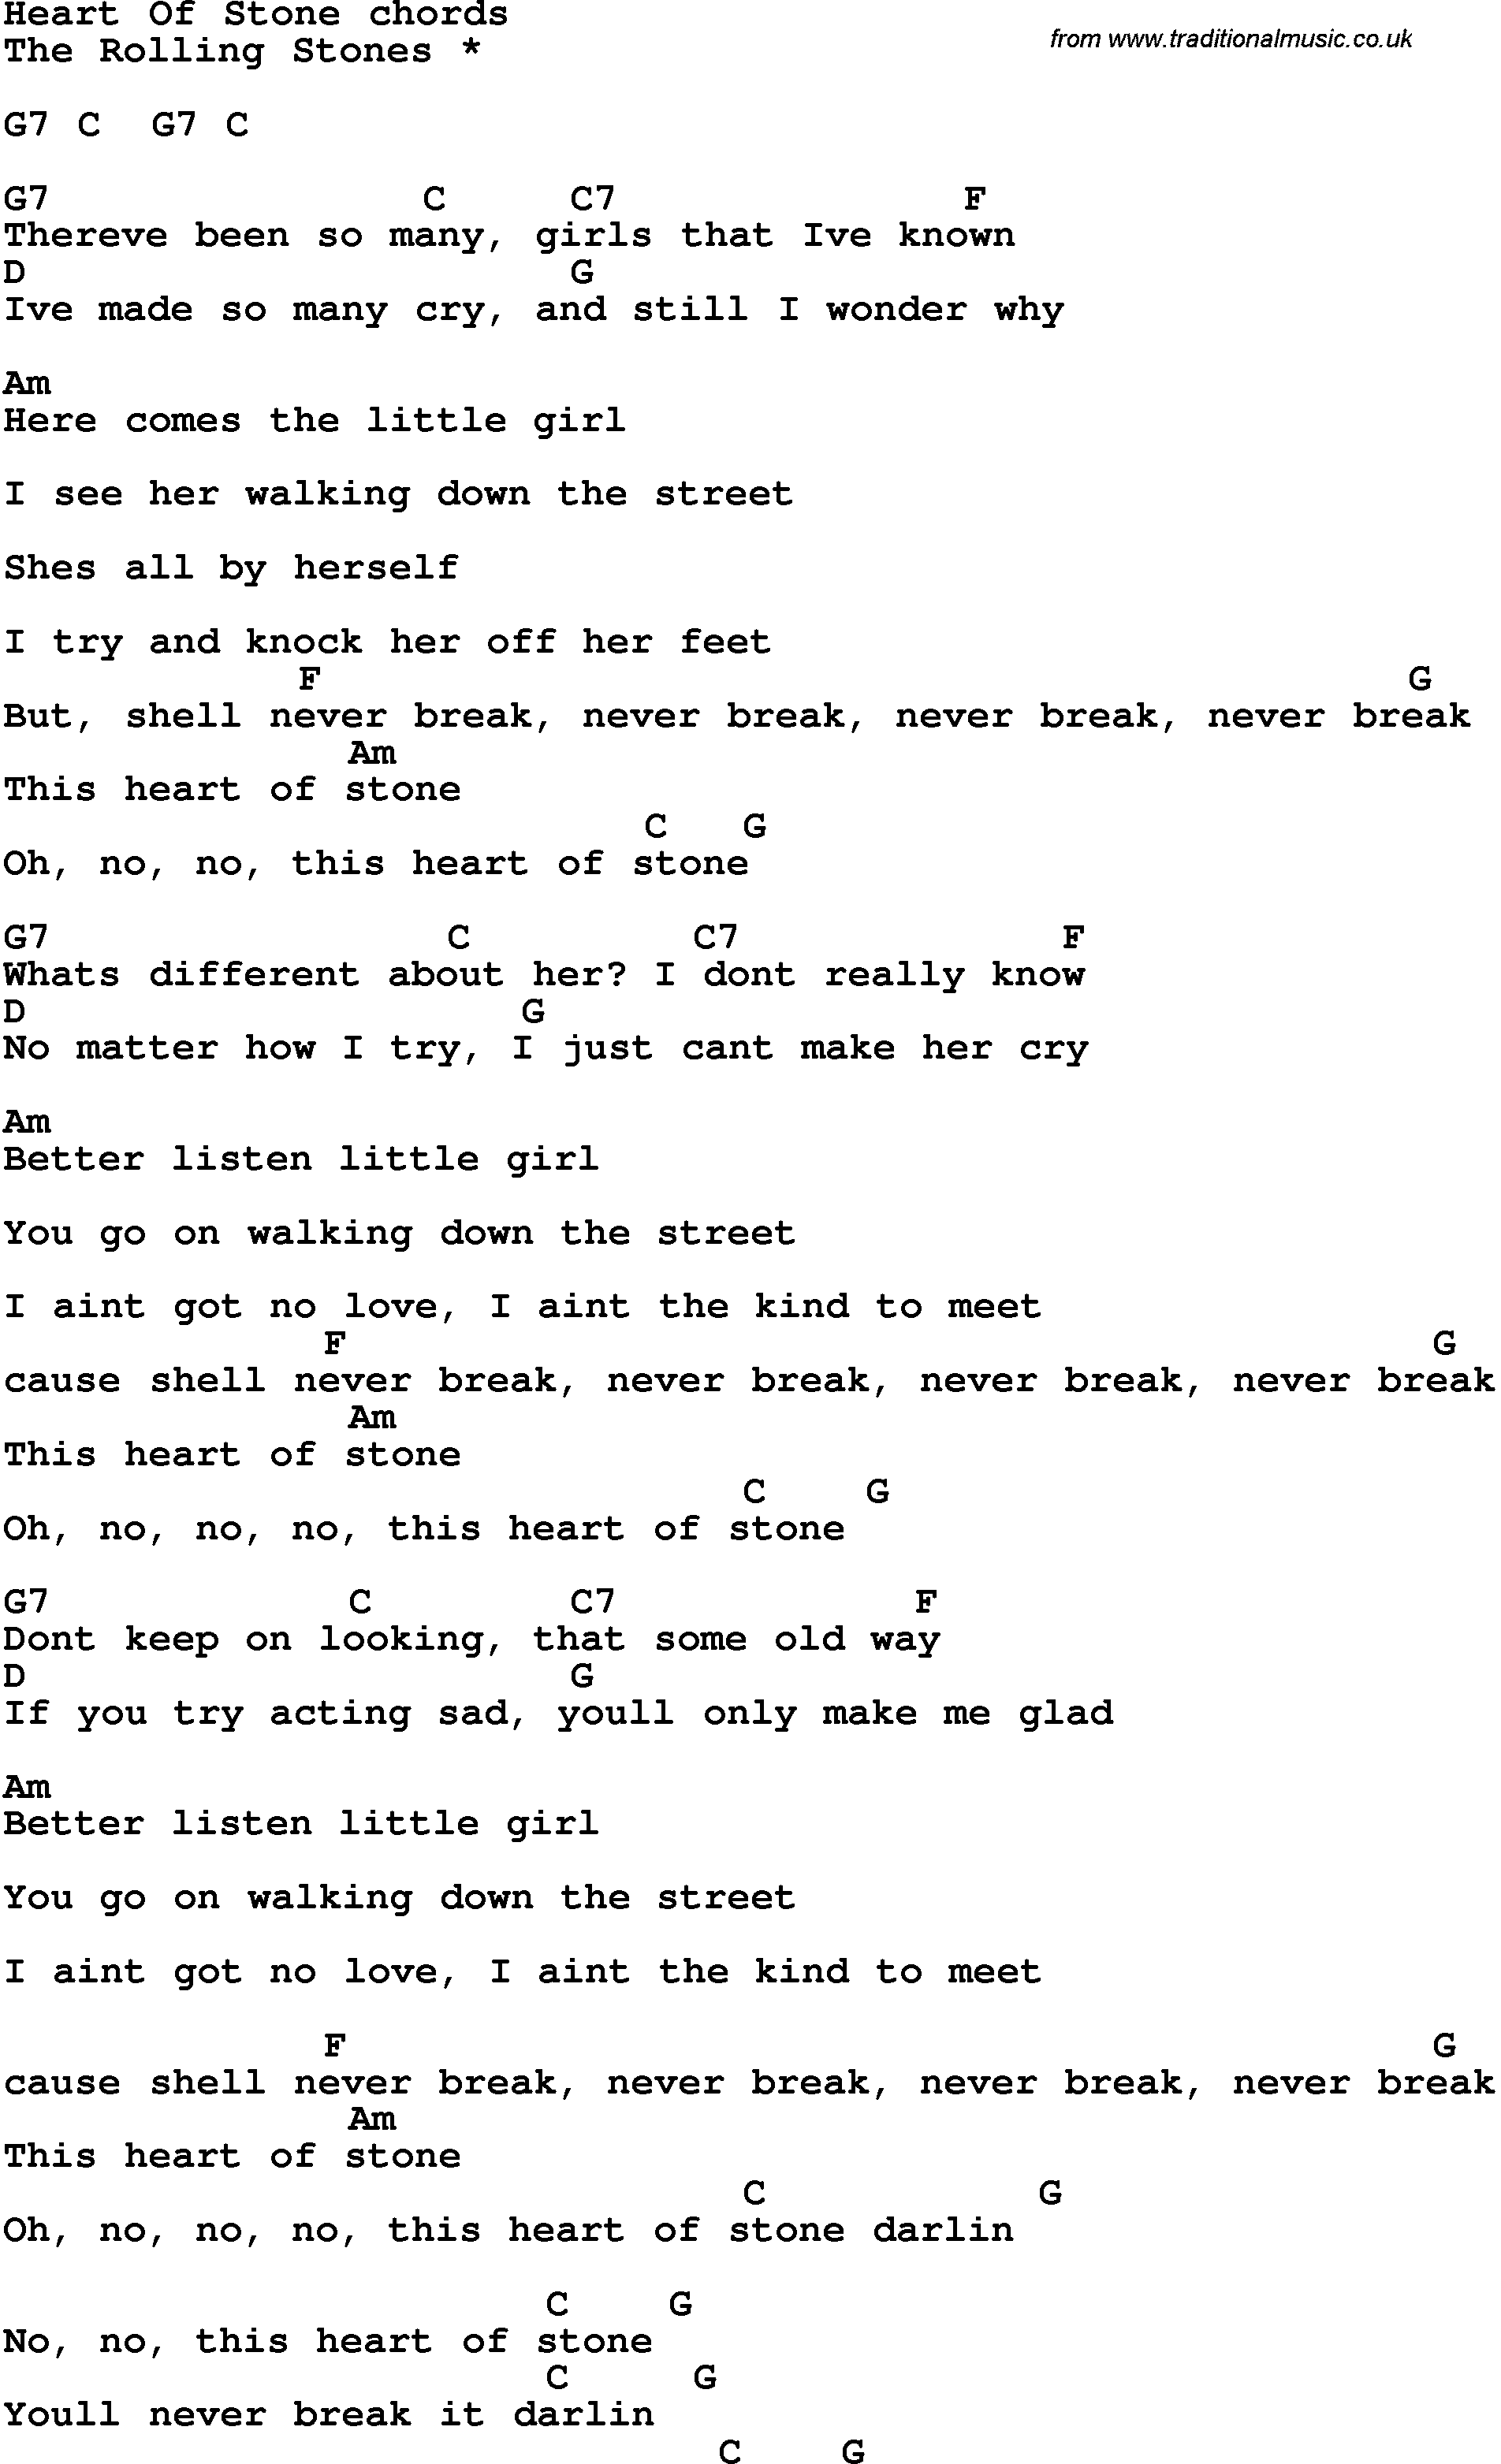 Song Lyrics with guitar chords for Heart Of Stone